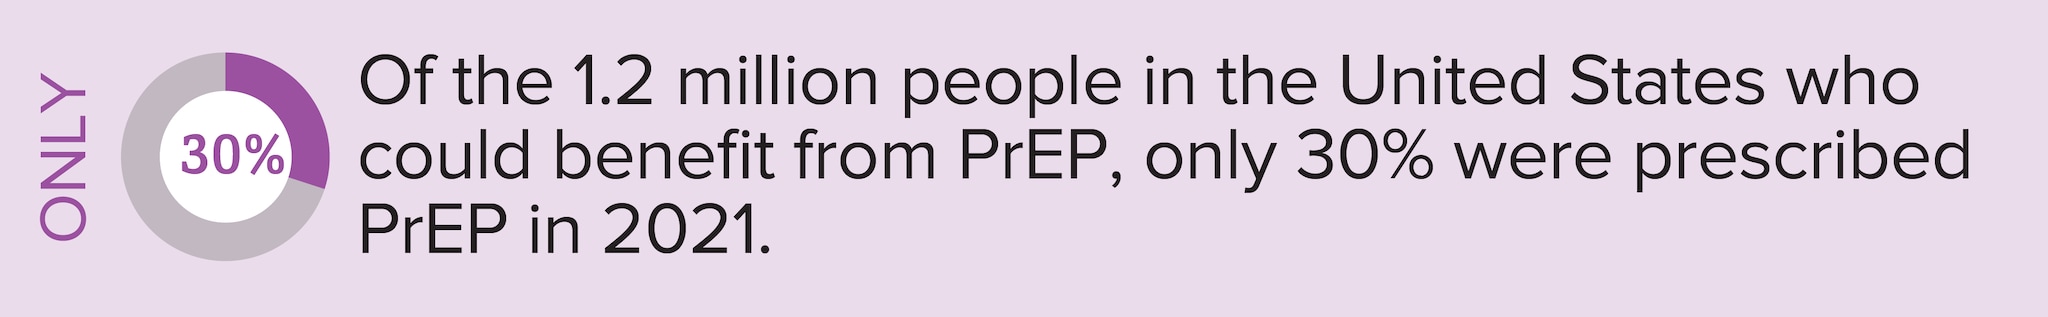 This image shows the percentage of people who could benefit from PrEP who were prescribed PrEP.